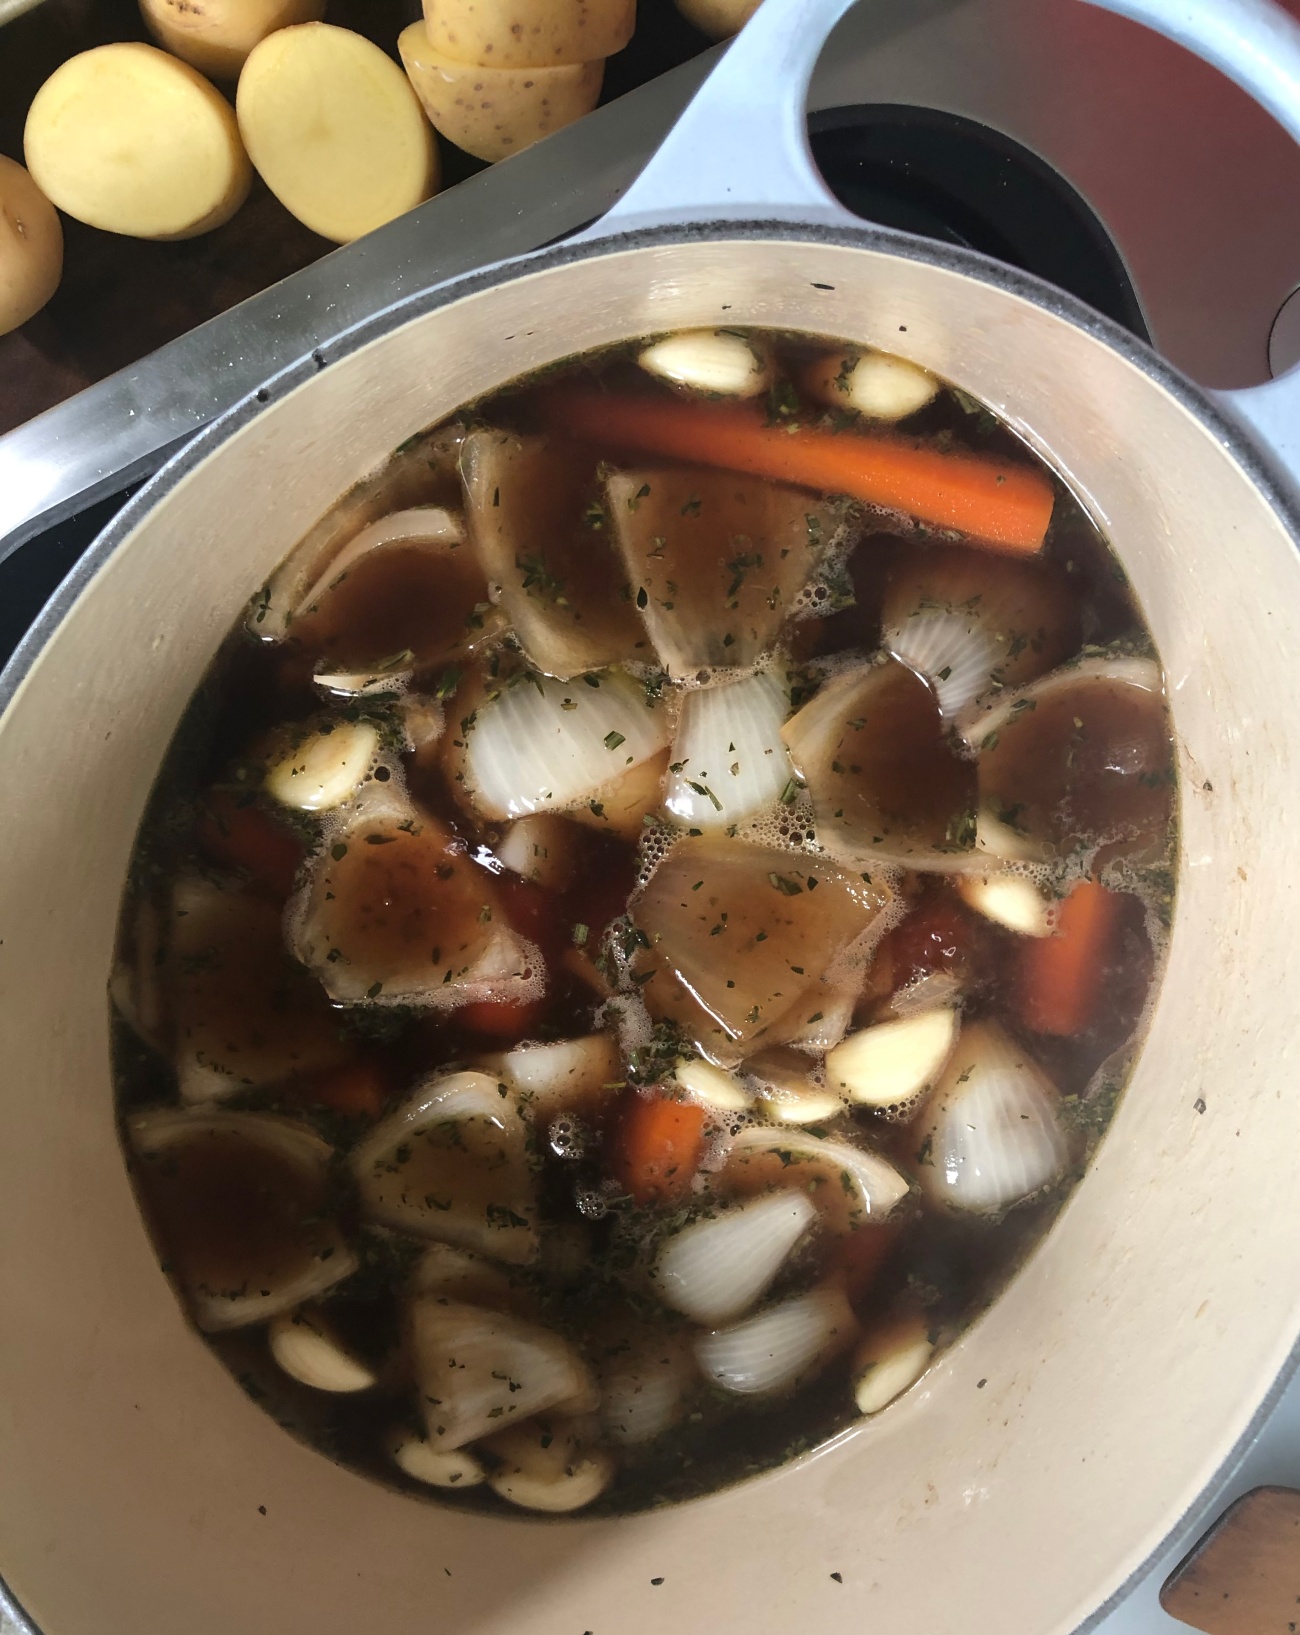 Once wine is reduced by at least half and the bottom is scraped clean, add carrots and onions back to pot. Place the brisket on top, then add the beef stock.